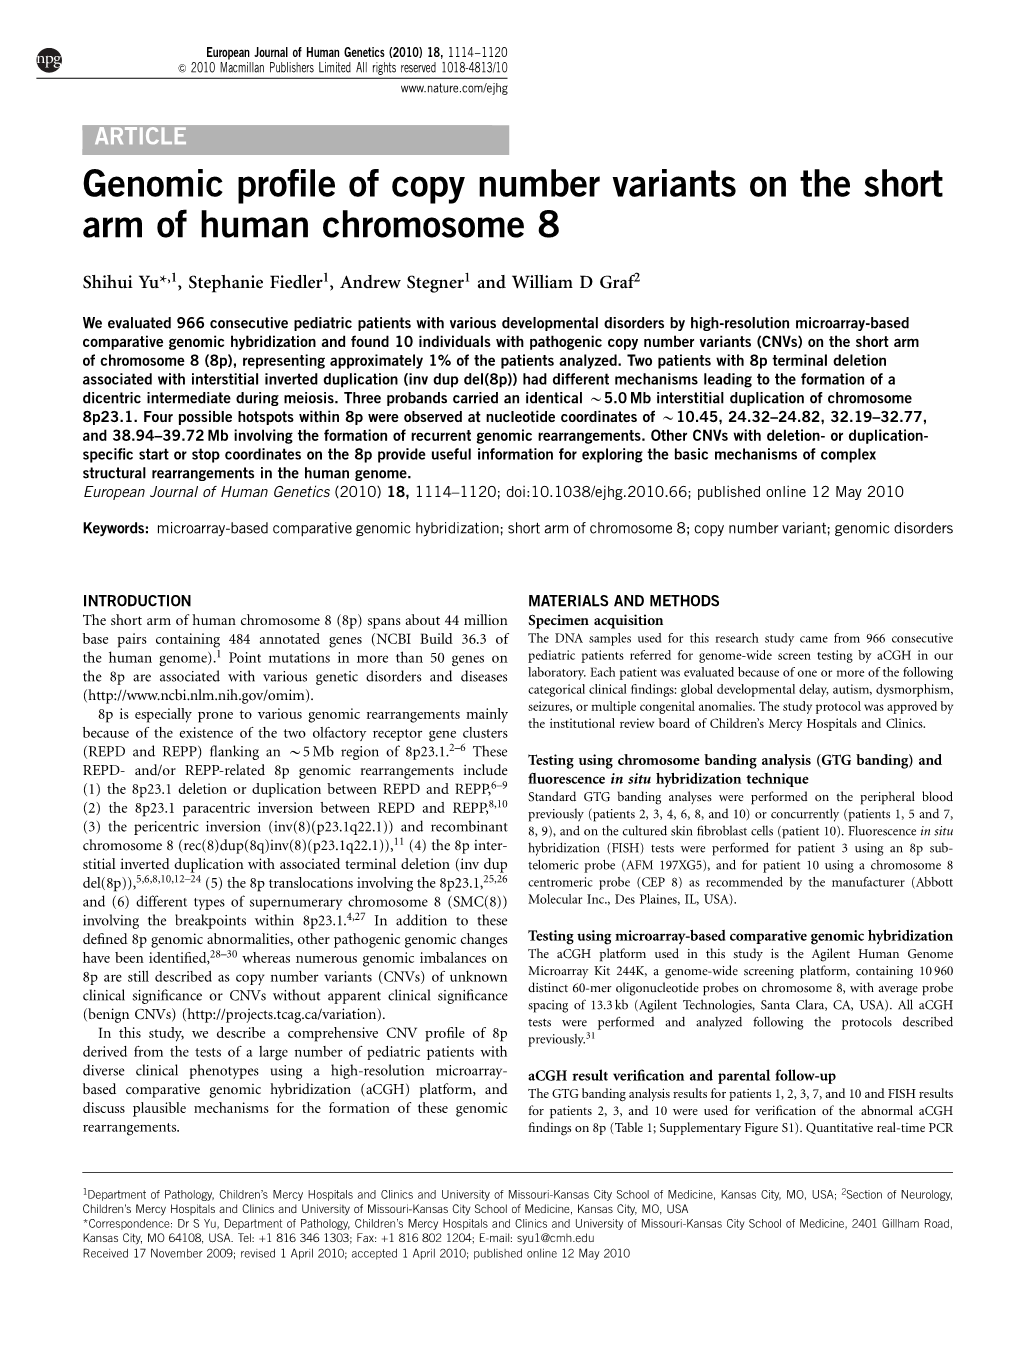 Genomic Profile of Copy Number Variants on the Short Arm of Human